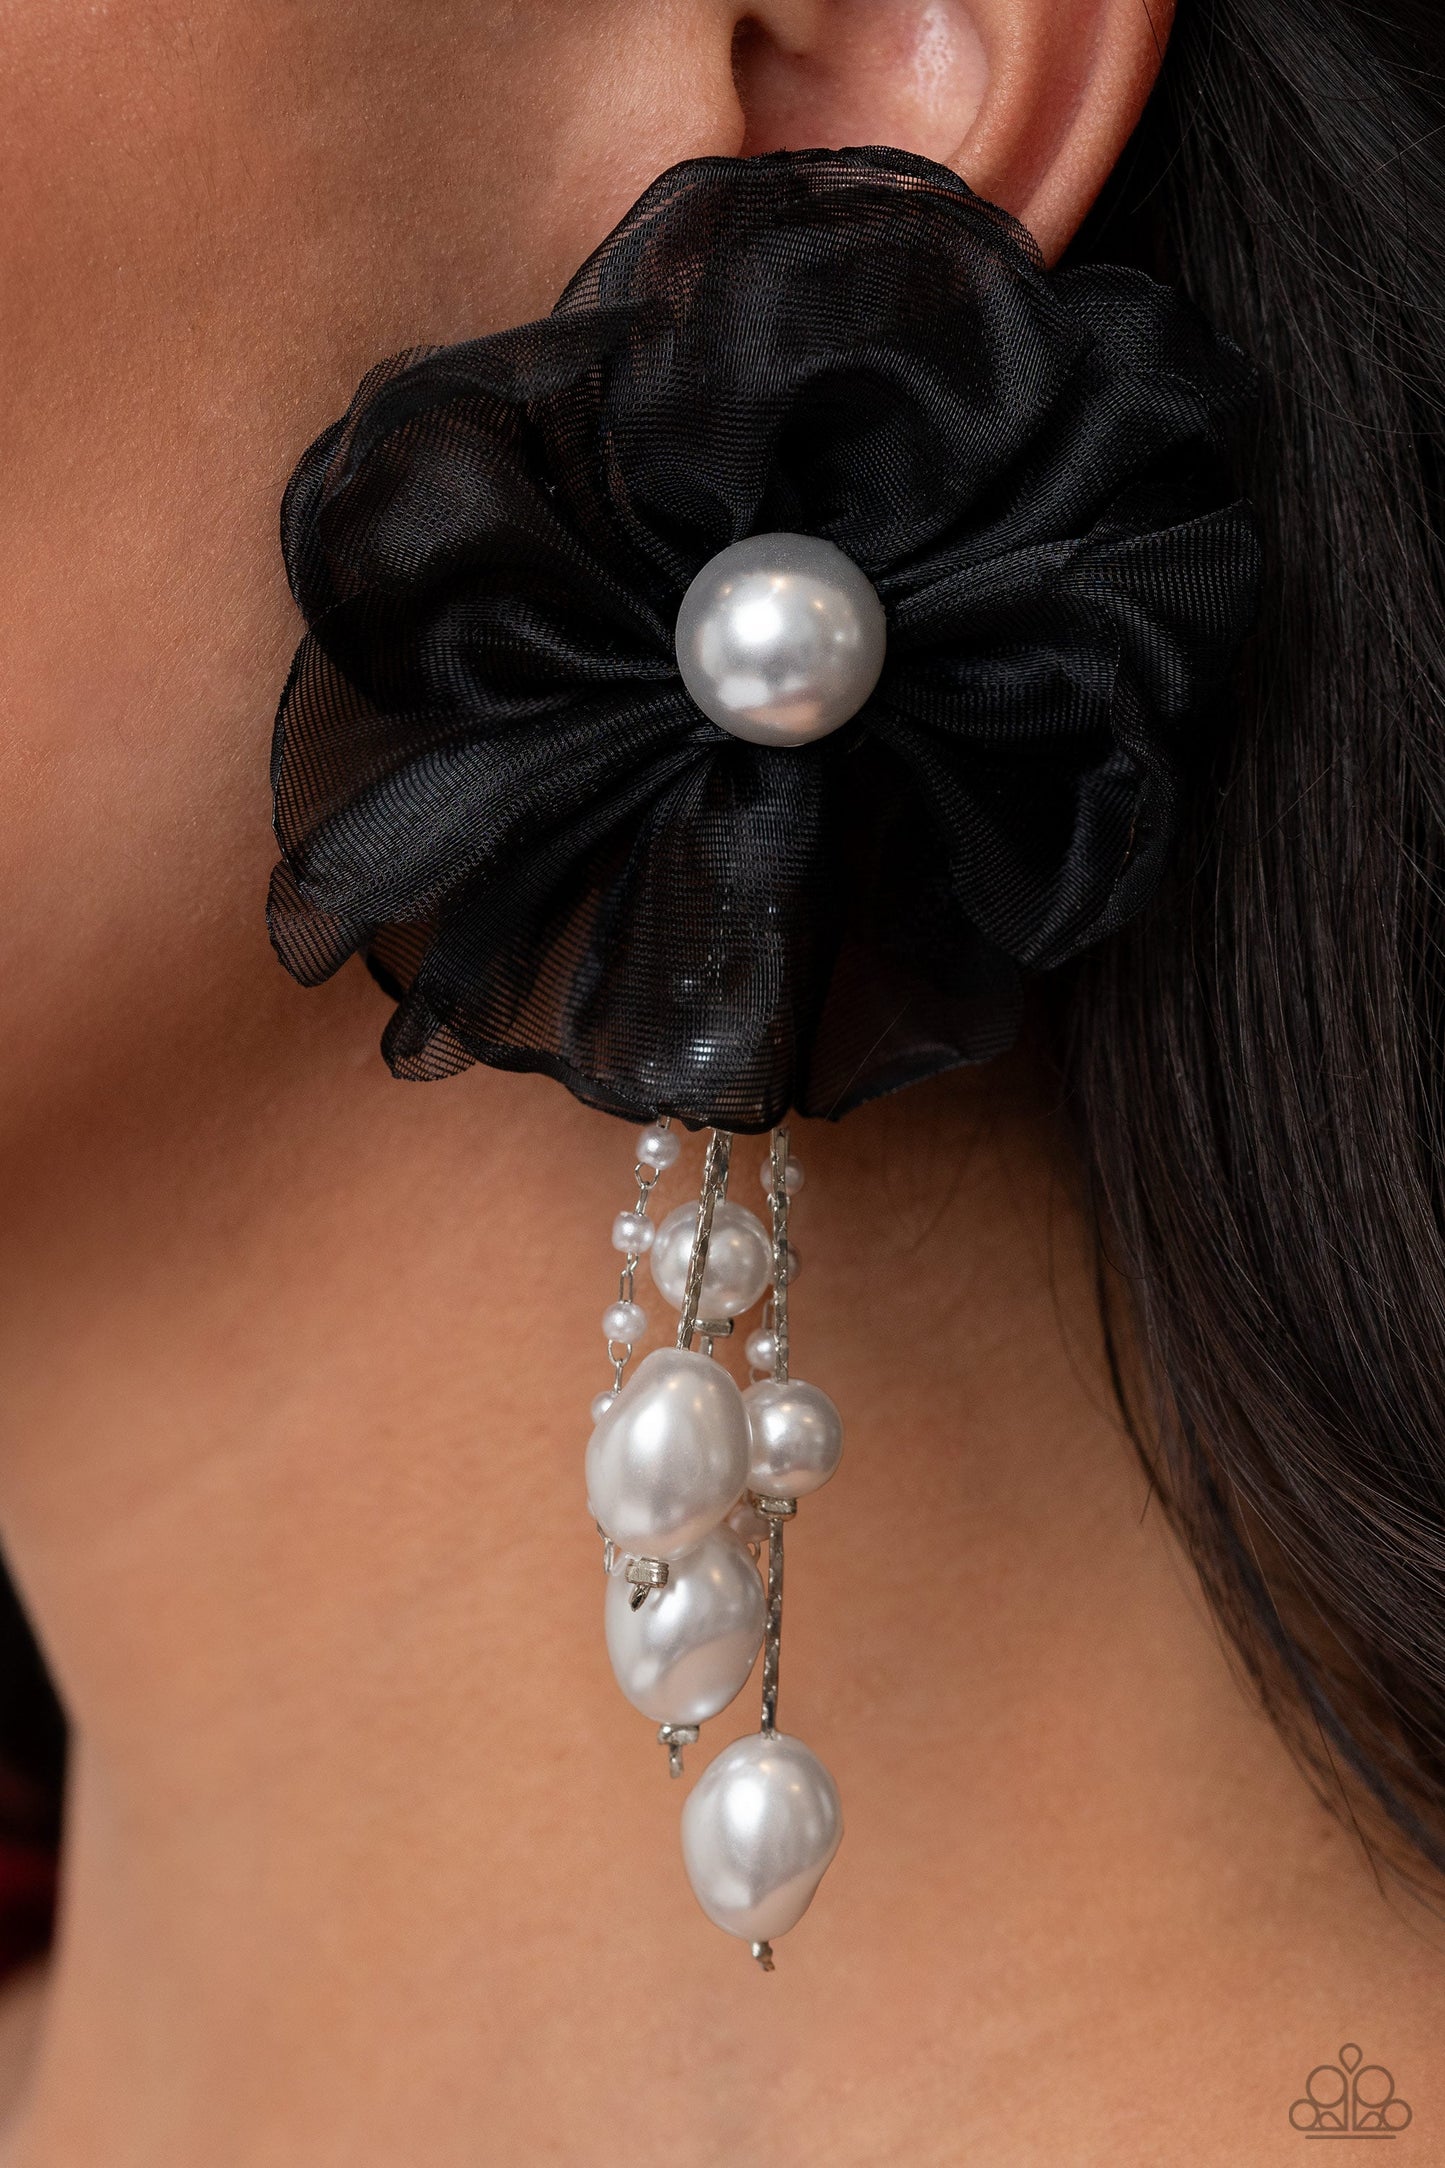 Dripping In Decadence - Black and White Pearl Earrings - Paparazzi Accessories - Folds of black netting gather around a glossy white pearl center, creating a spunky blossom. Cascading from the black netted petals, various white pearls in glossy, baroque, and dainty settings are infused along silver cobra chains for a refined finish. Earring attaches to a standard post fitting. Sold as one pair of post earrings.